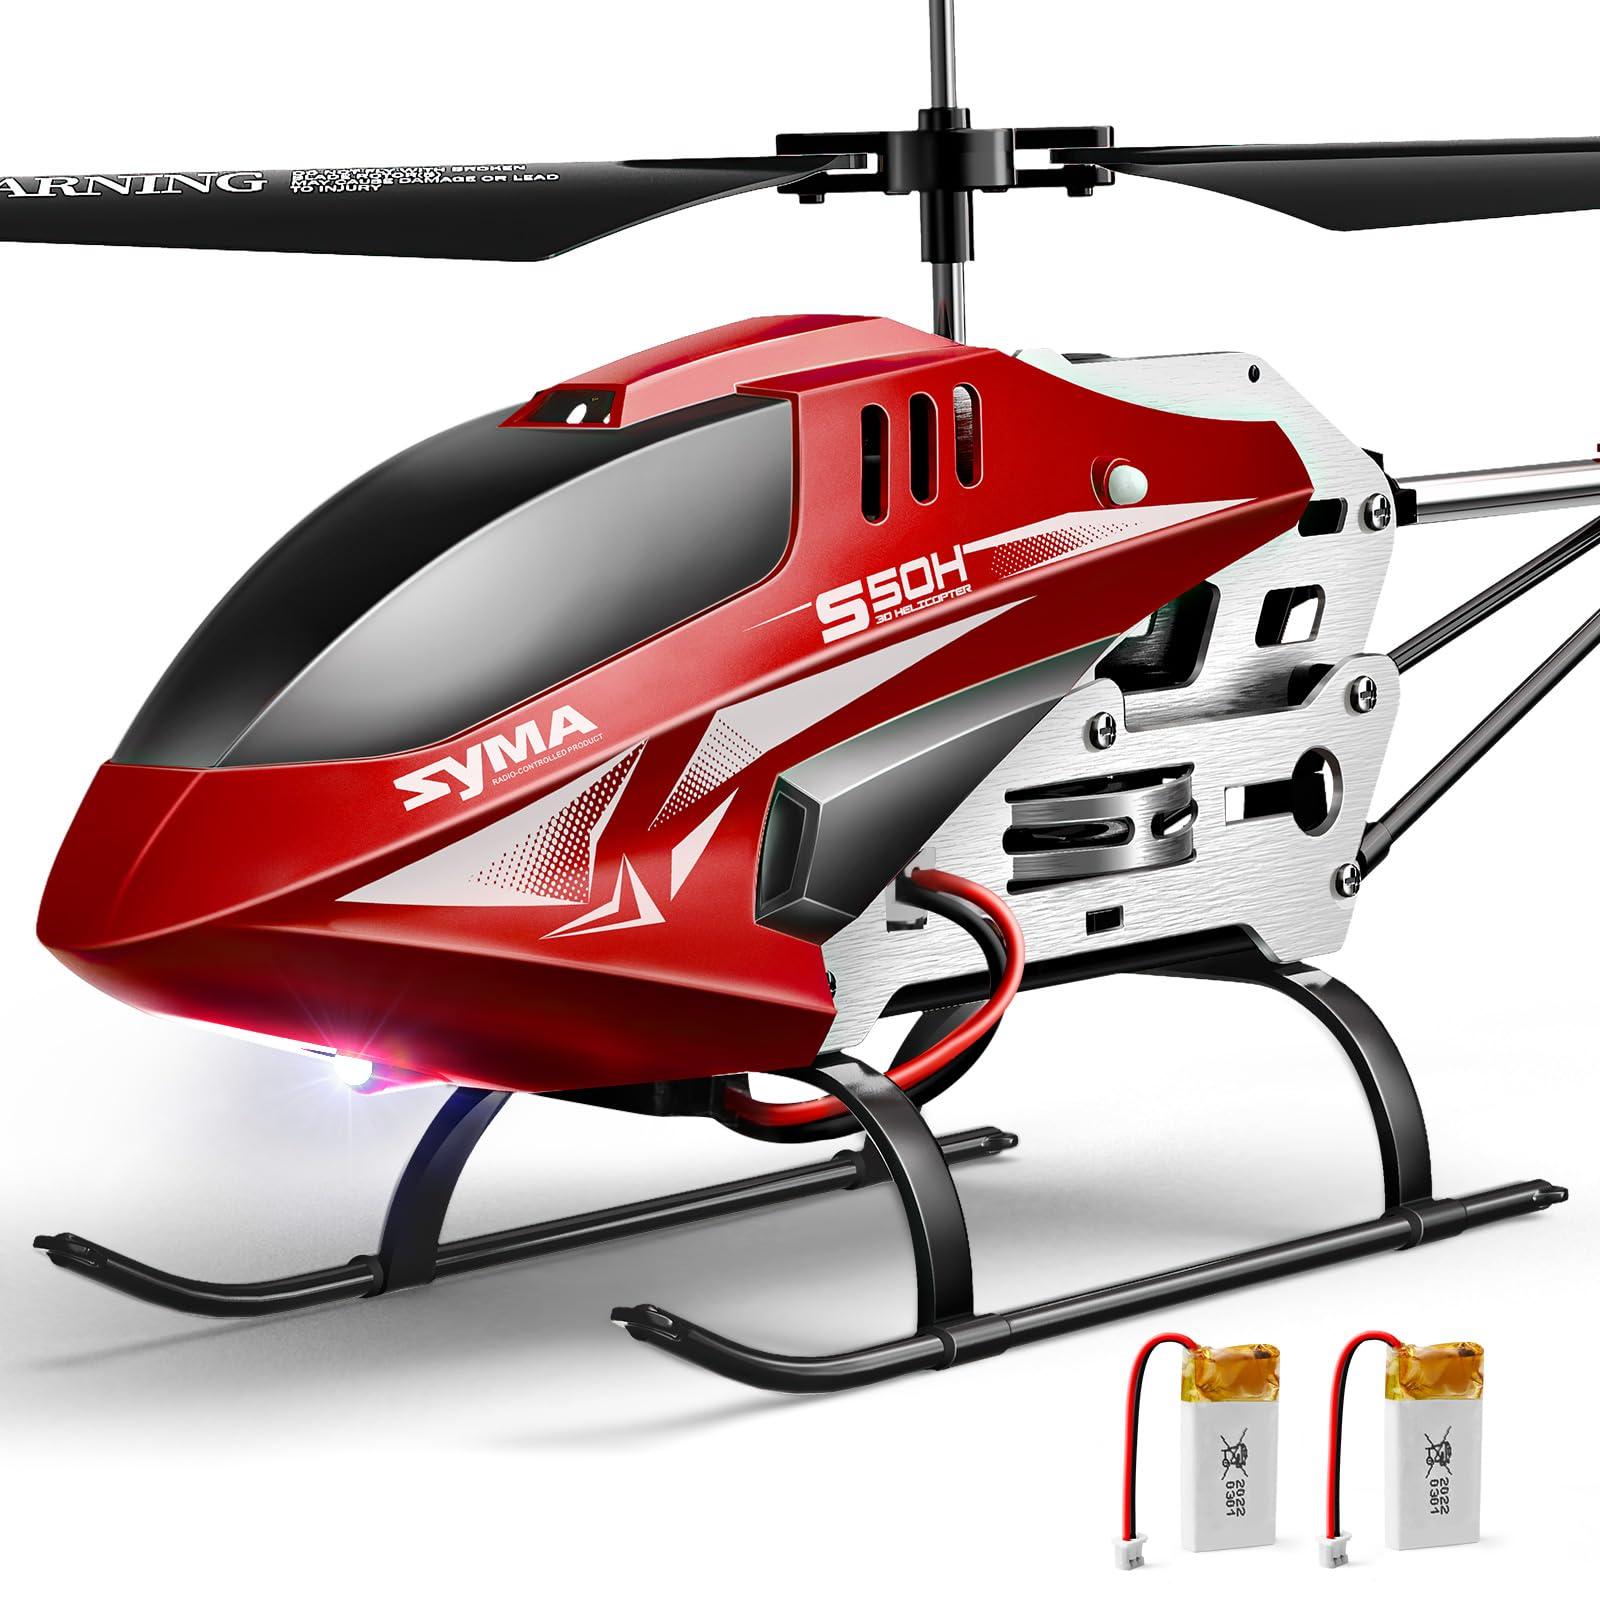 Indoor Mini Rc Helicopter: Indoor mini RC helicopter design focuses on maneuverability in small spaces